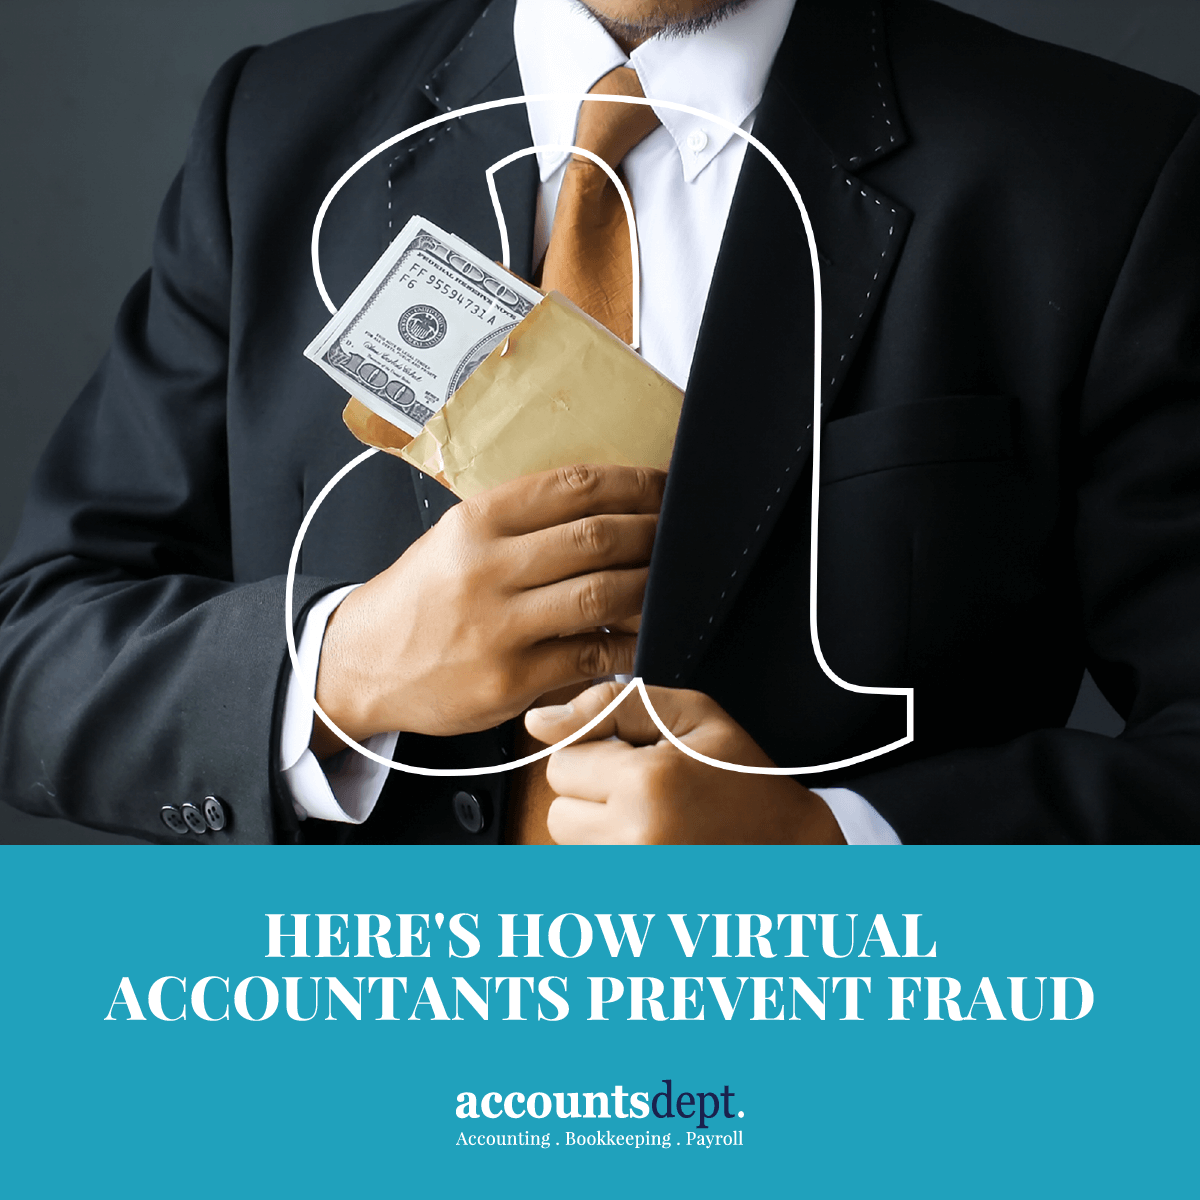 Here’s How Virtual Accountants Prevent Fraud.